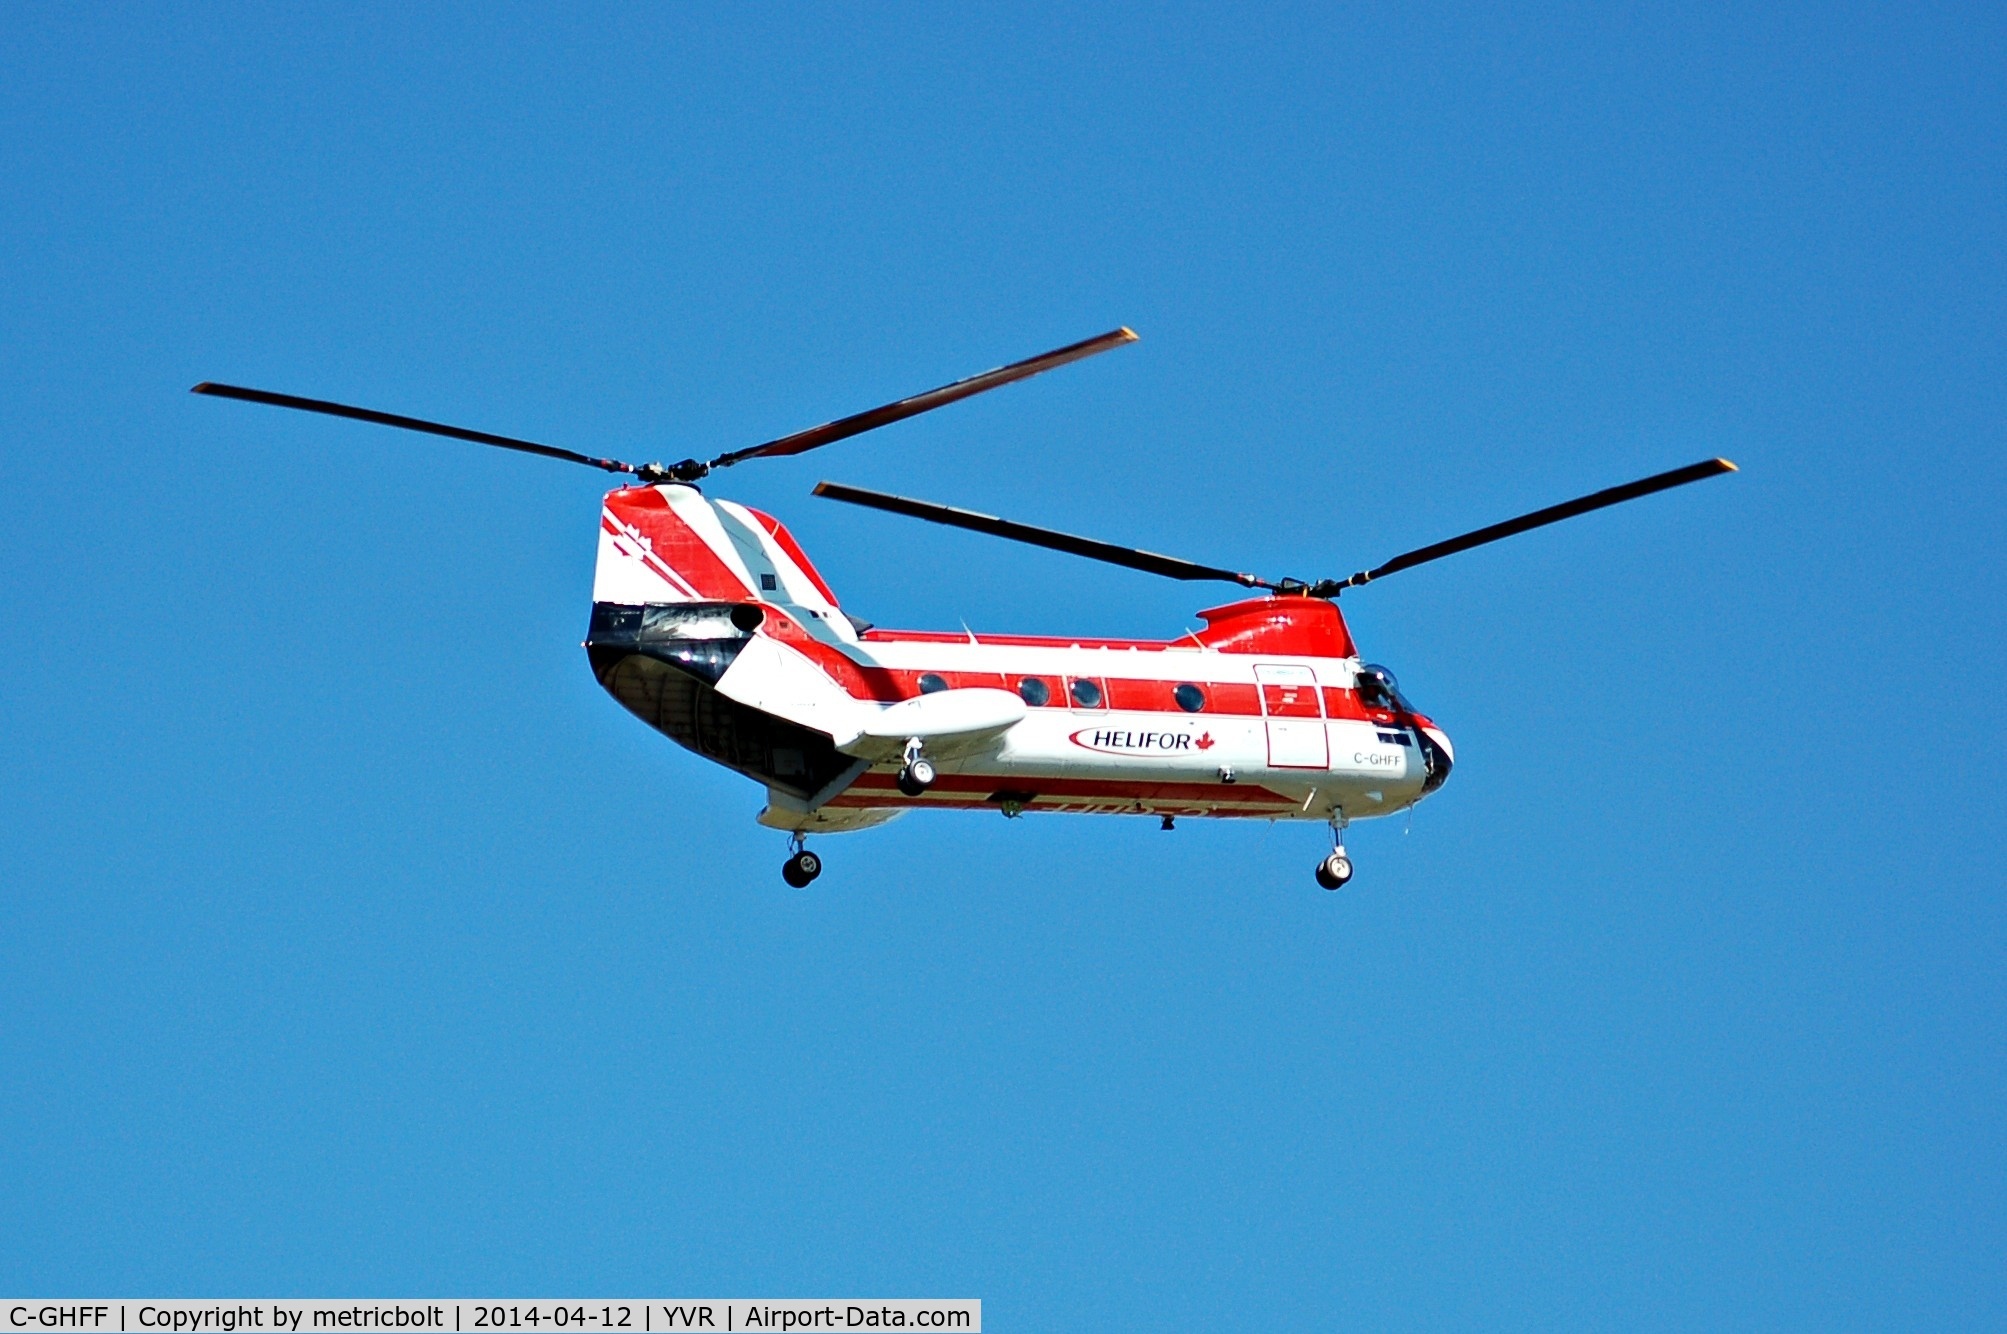 C-GHFF, 1963 Boeing Vertol 107-II C/N 406, quick shot as it flew by unexpectedly